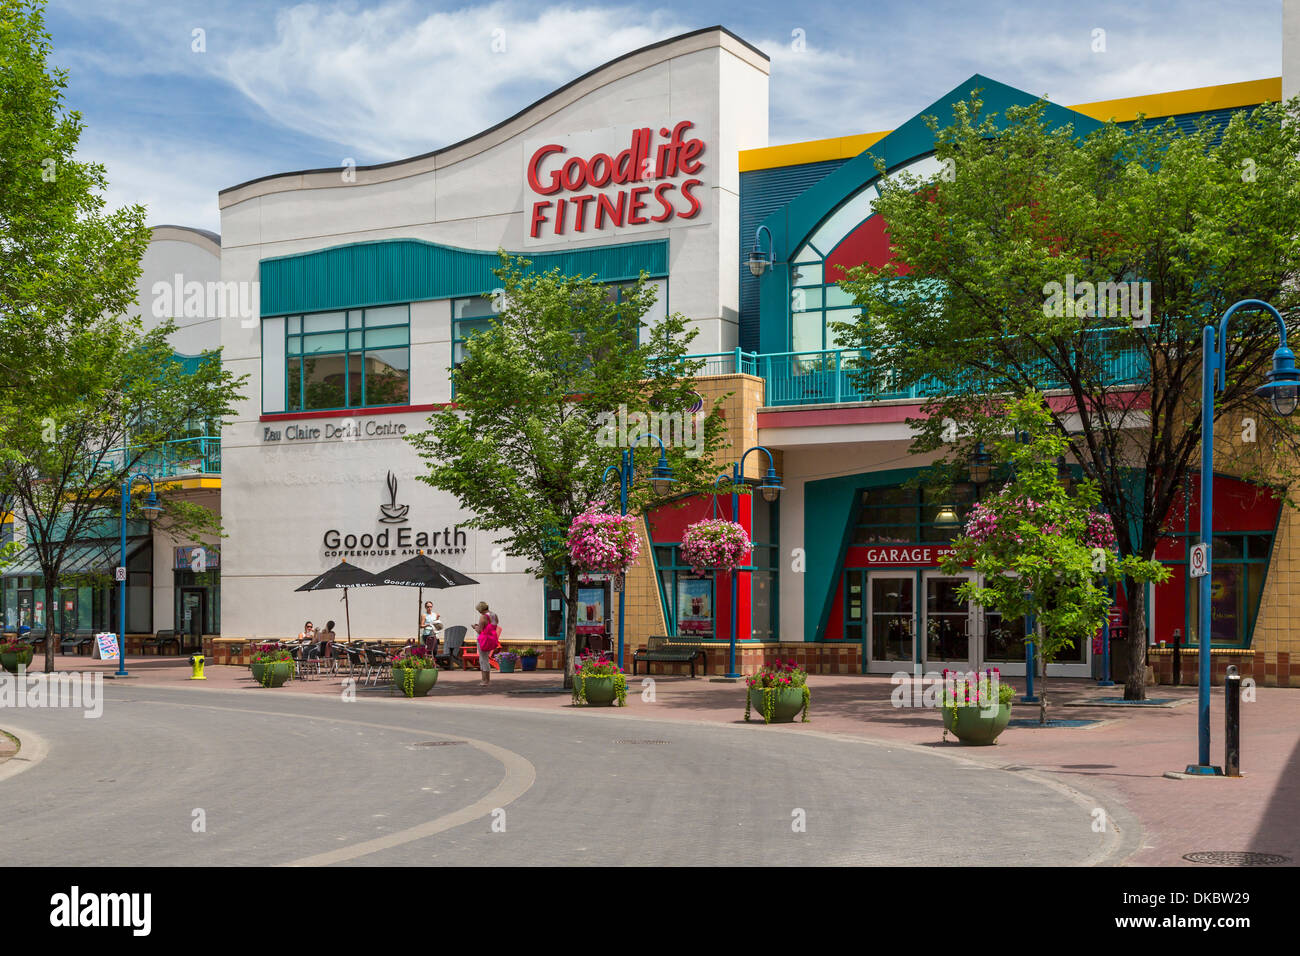 An indoor market and fitness center in downtown Calgary, Alberta, Canada. Stock Photo